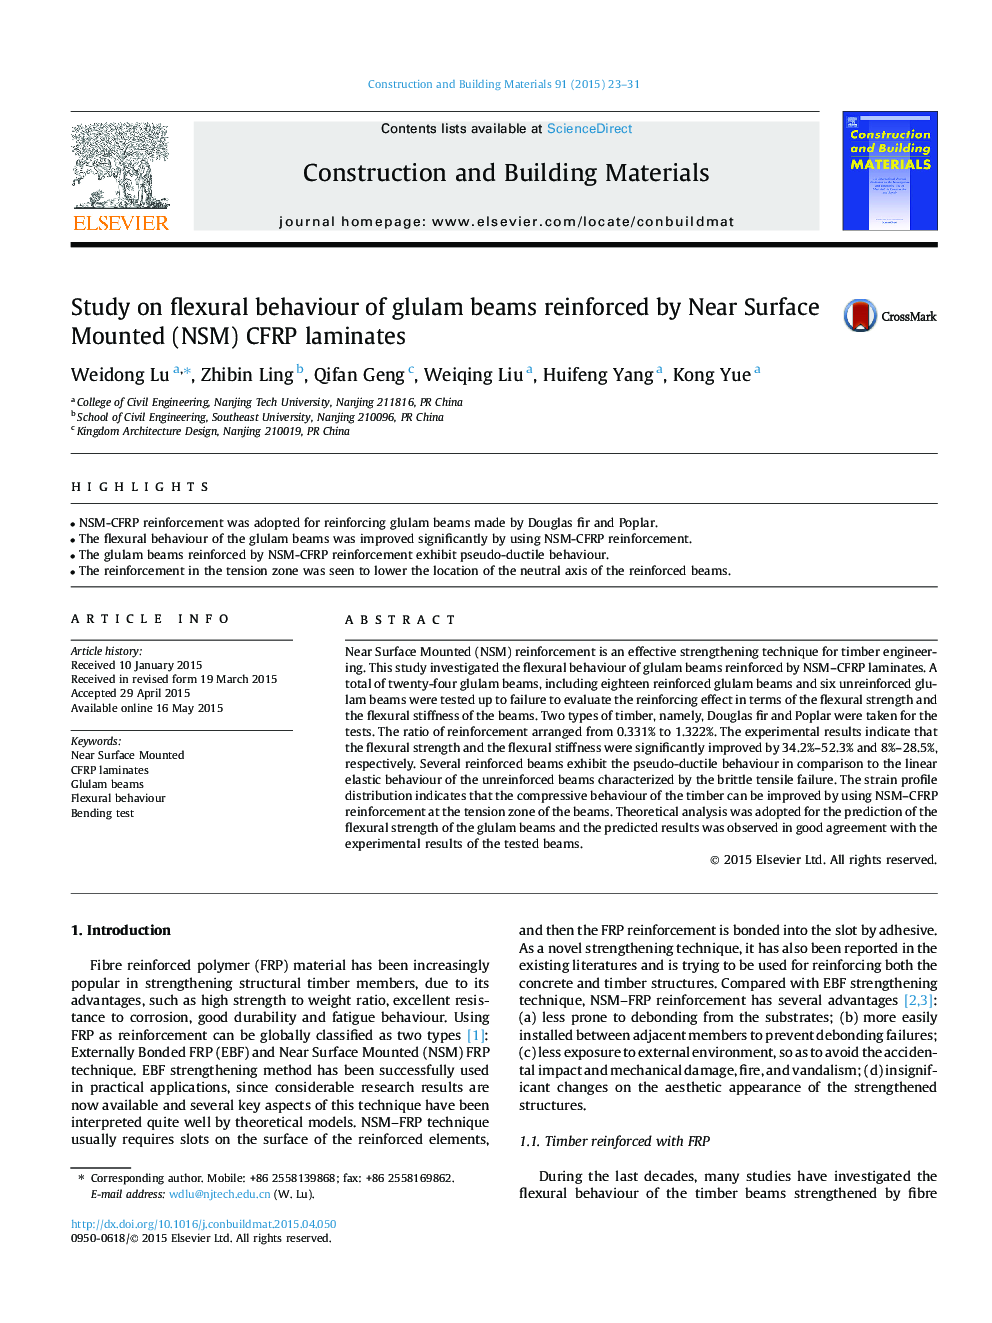 Study on flexural behaviour of glulam beams reinforced by Near Surface Mounted (NSM) CFRP laminates